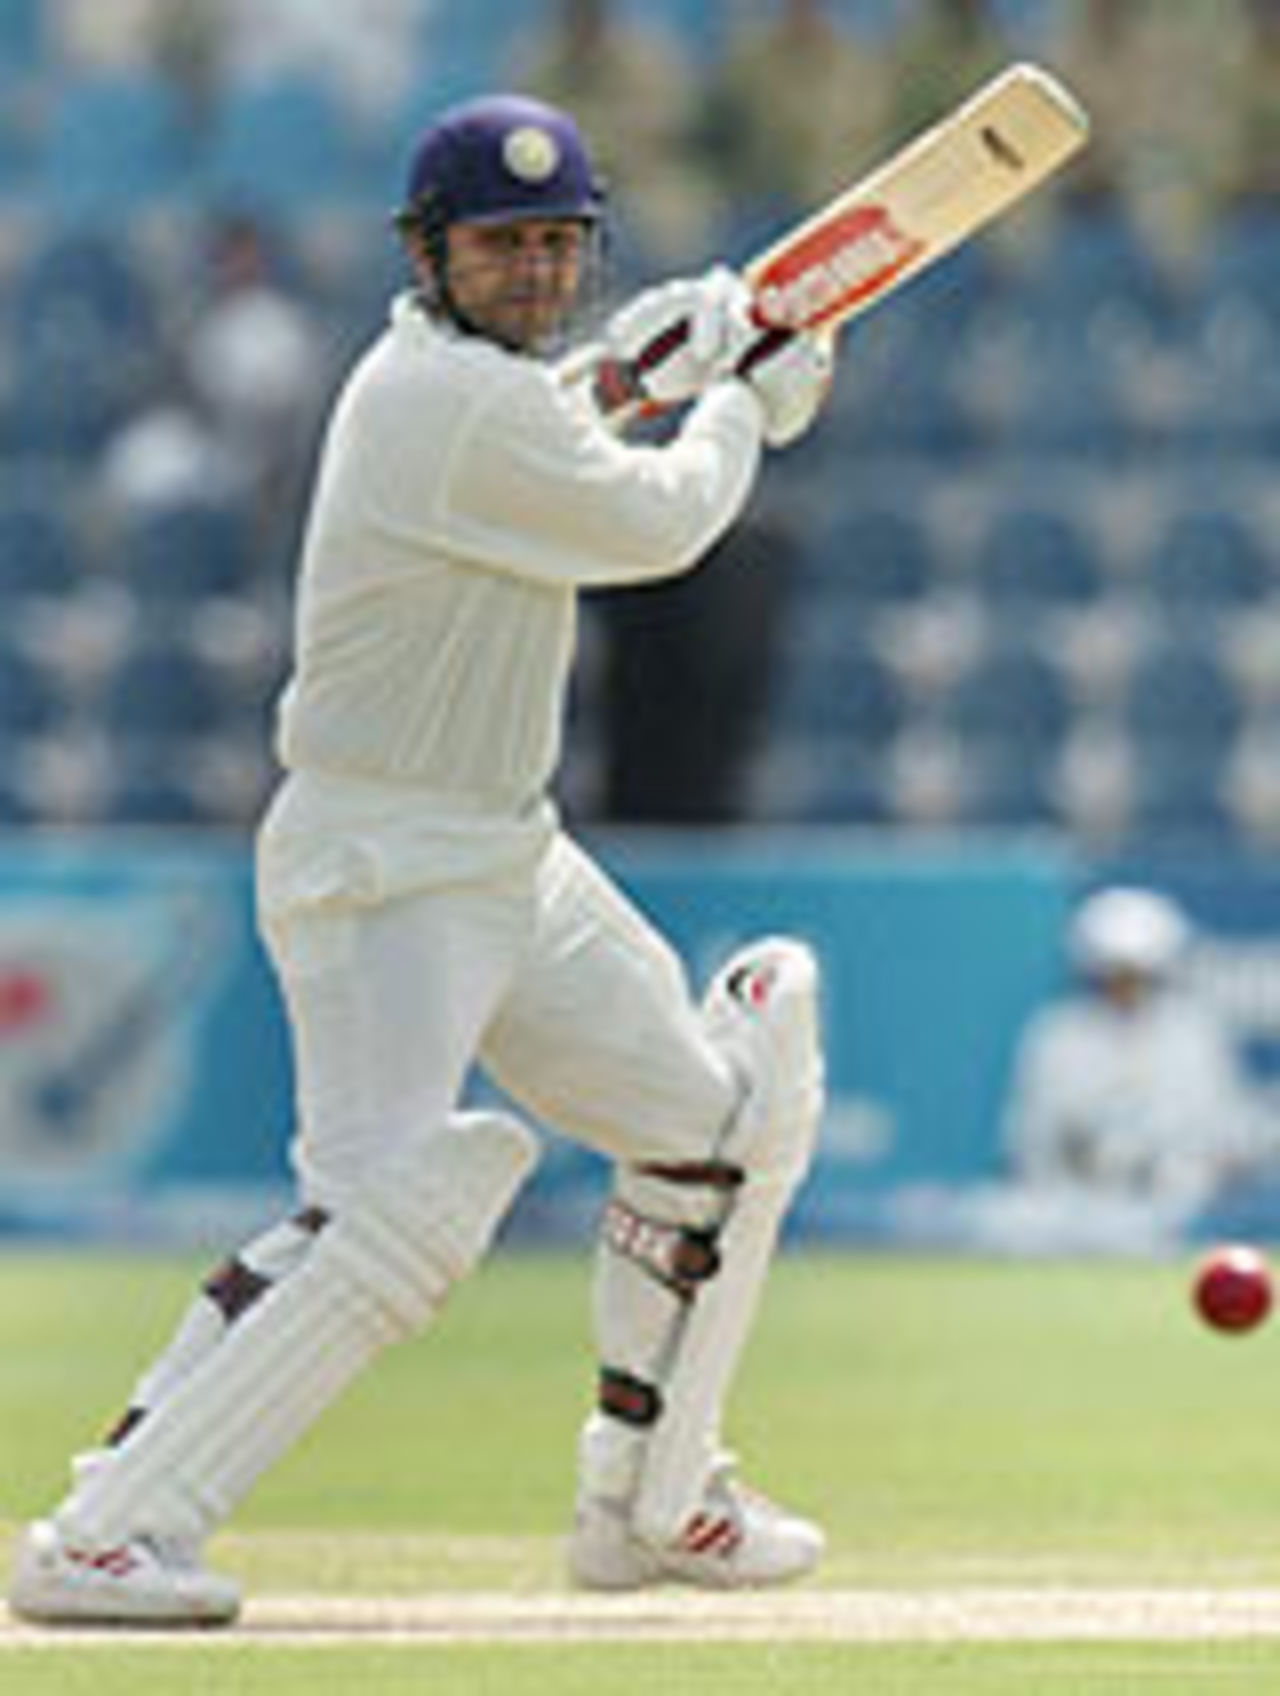 Virender Sehwag drives the ball square, Pakistan v India, 1st Test, Multan, 1st day, March 28, 2004